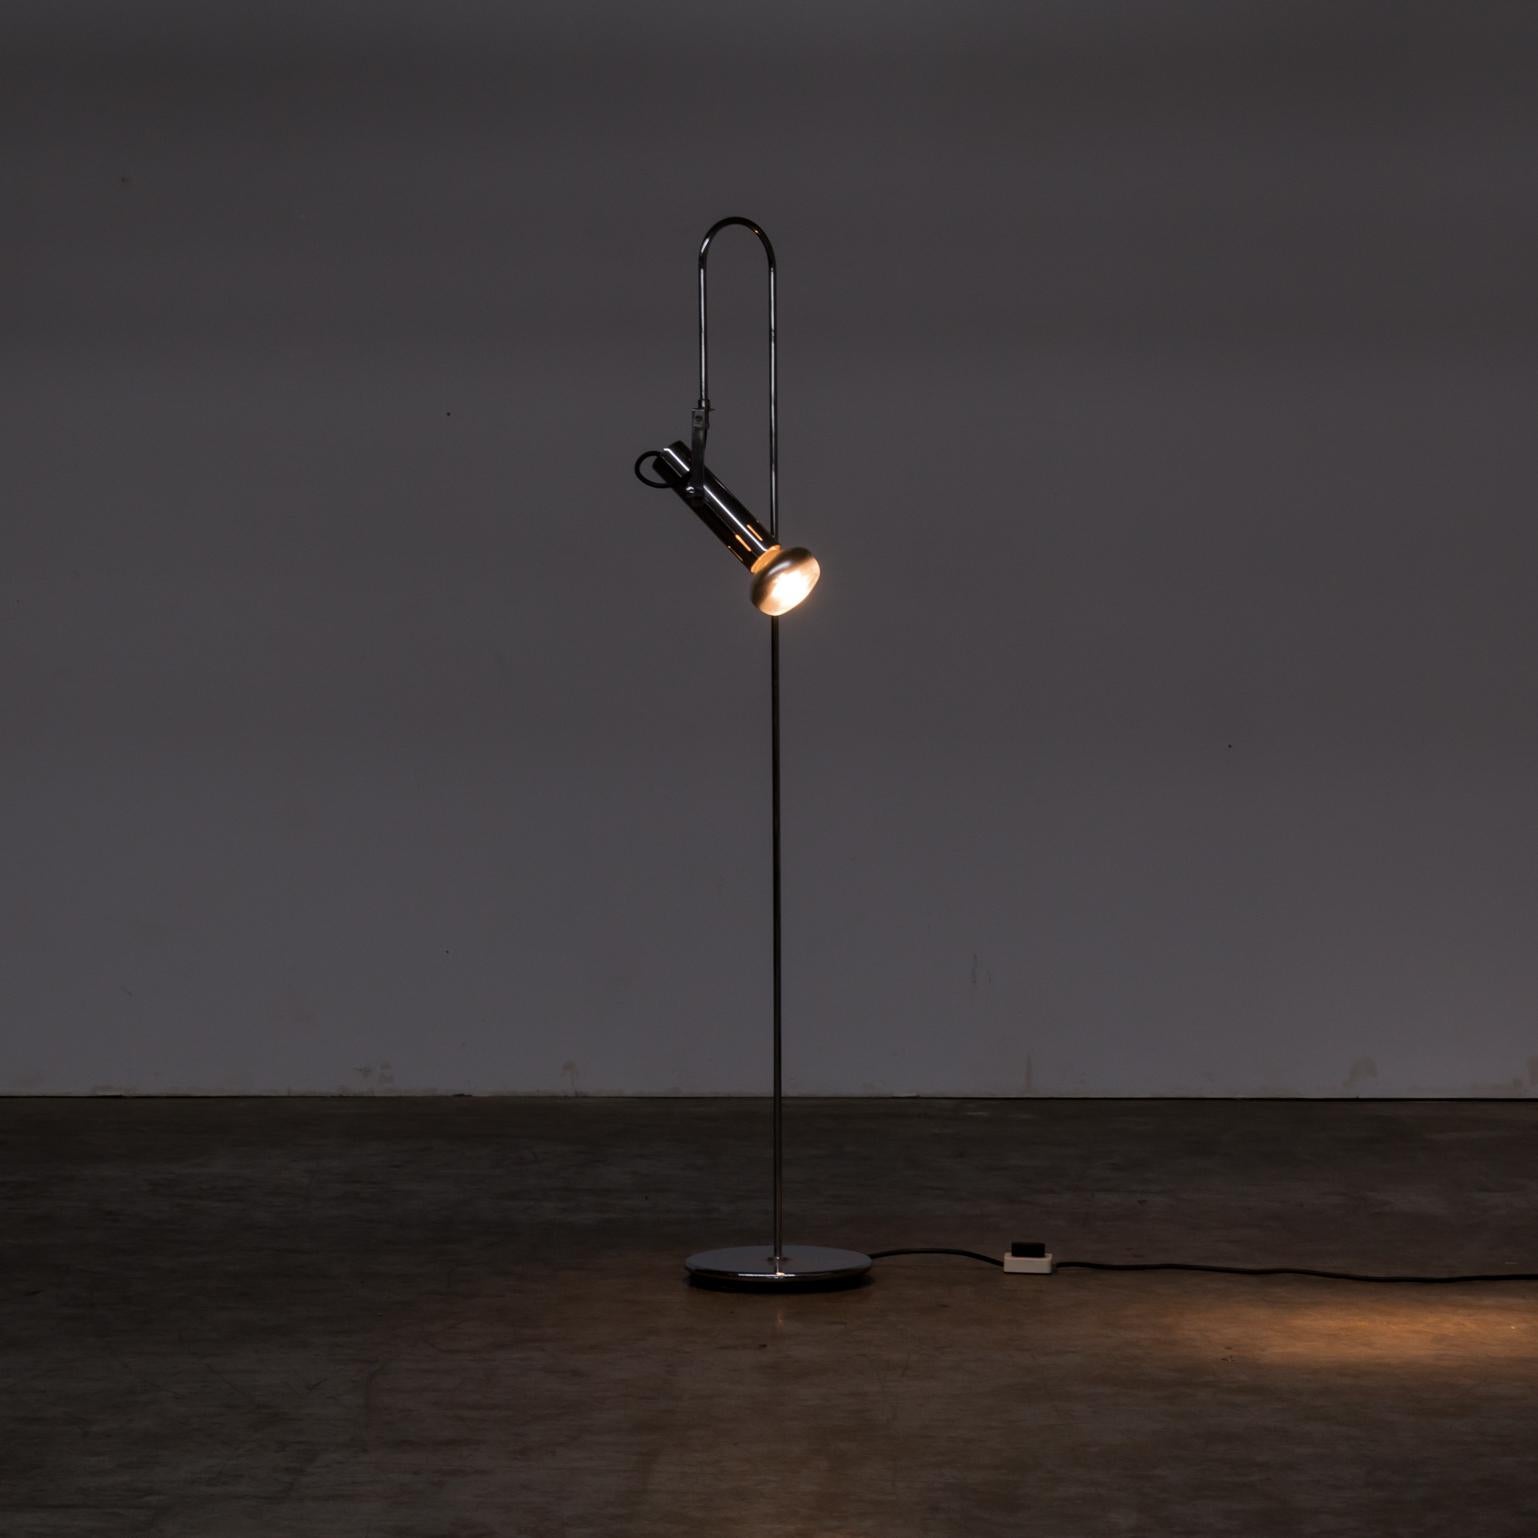 Architectural design floorlamp. Good and working condition, consistent with age and use.